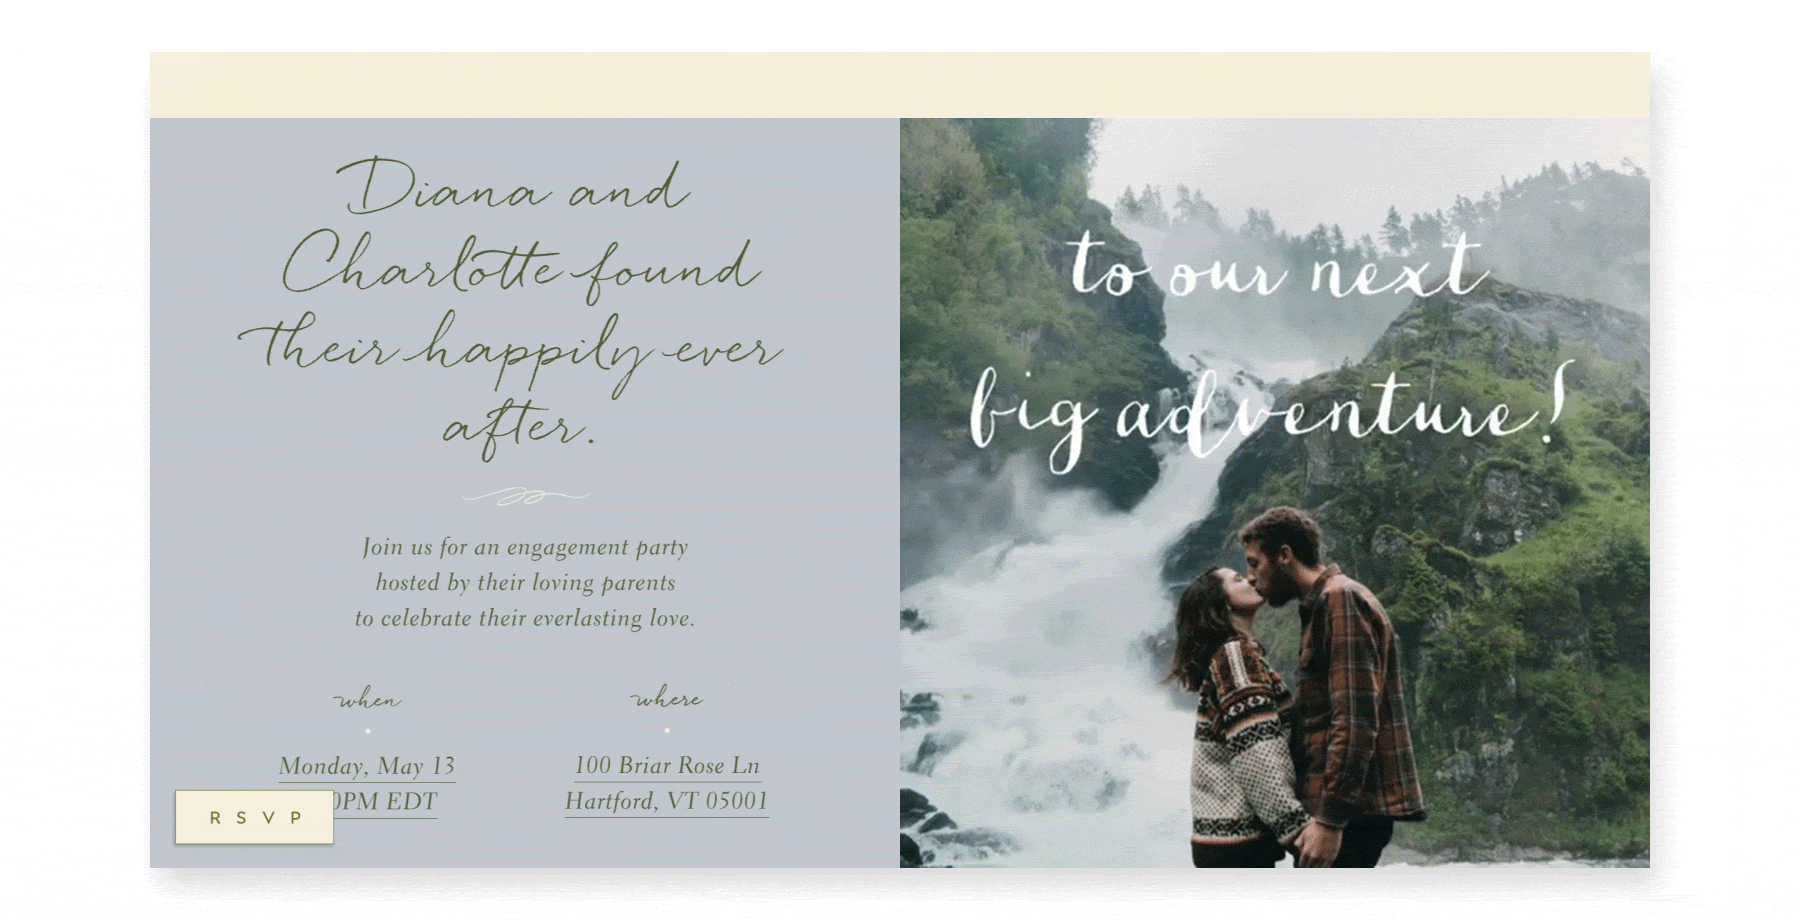 An engagement party invite with animated text that reads “to our next adventure!” over a photo of a couple kissing by a waterfall.